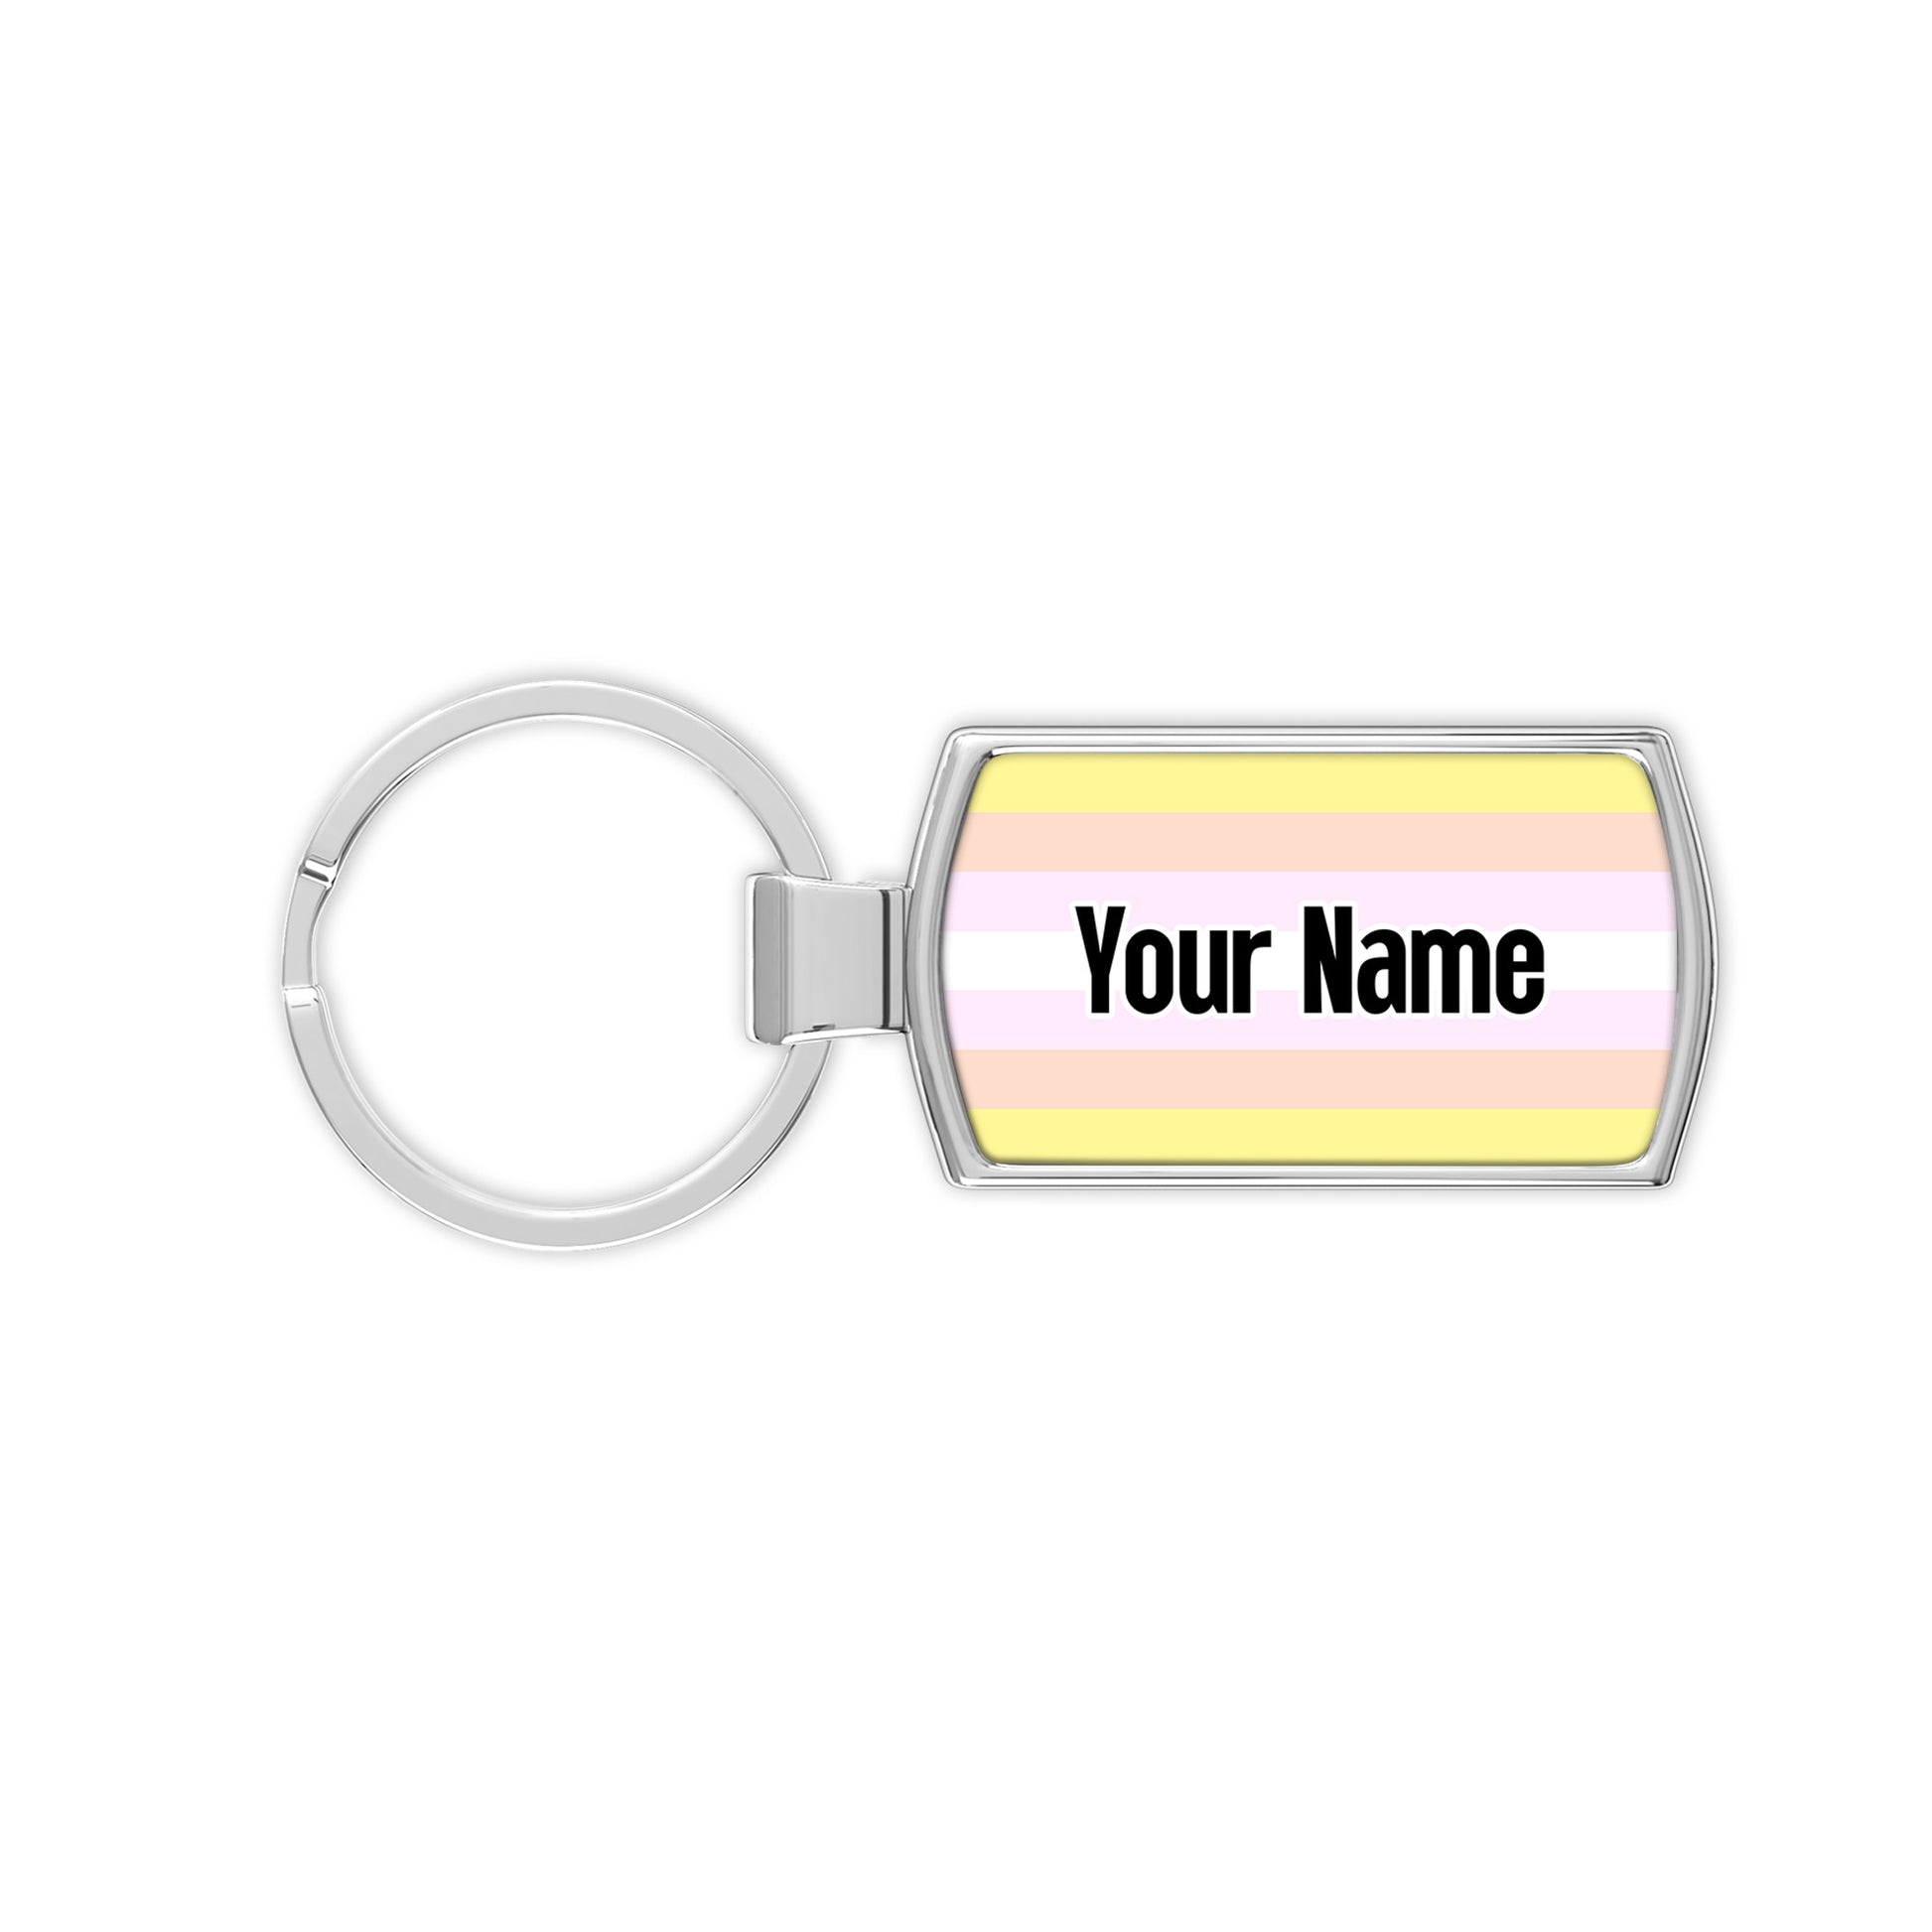 Pangender pride flag metal keyring that comes personalised with your name